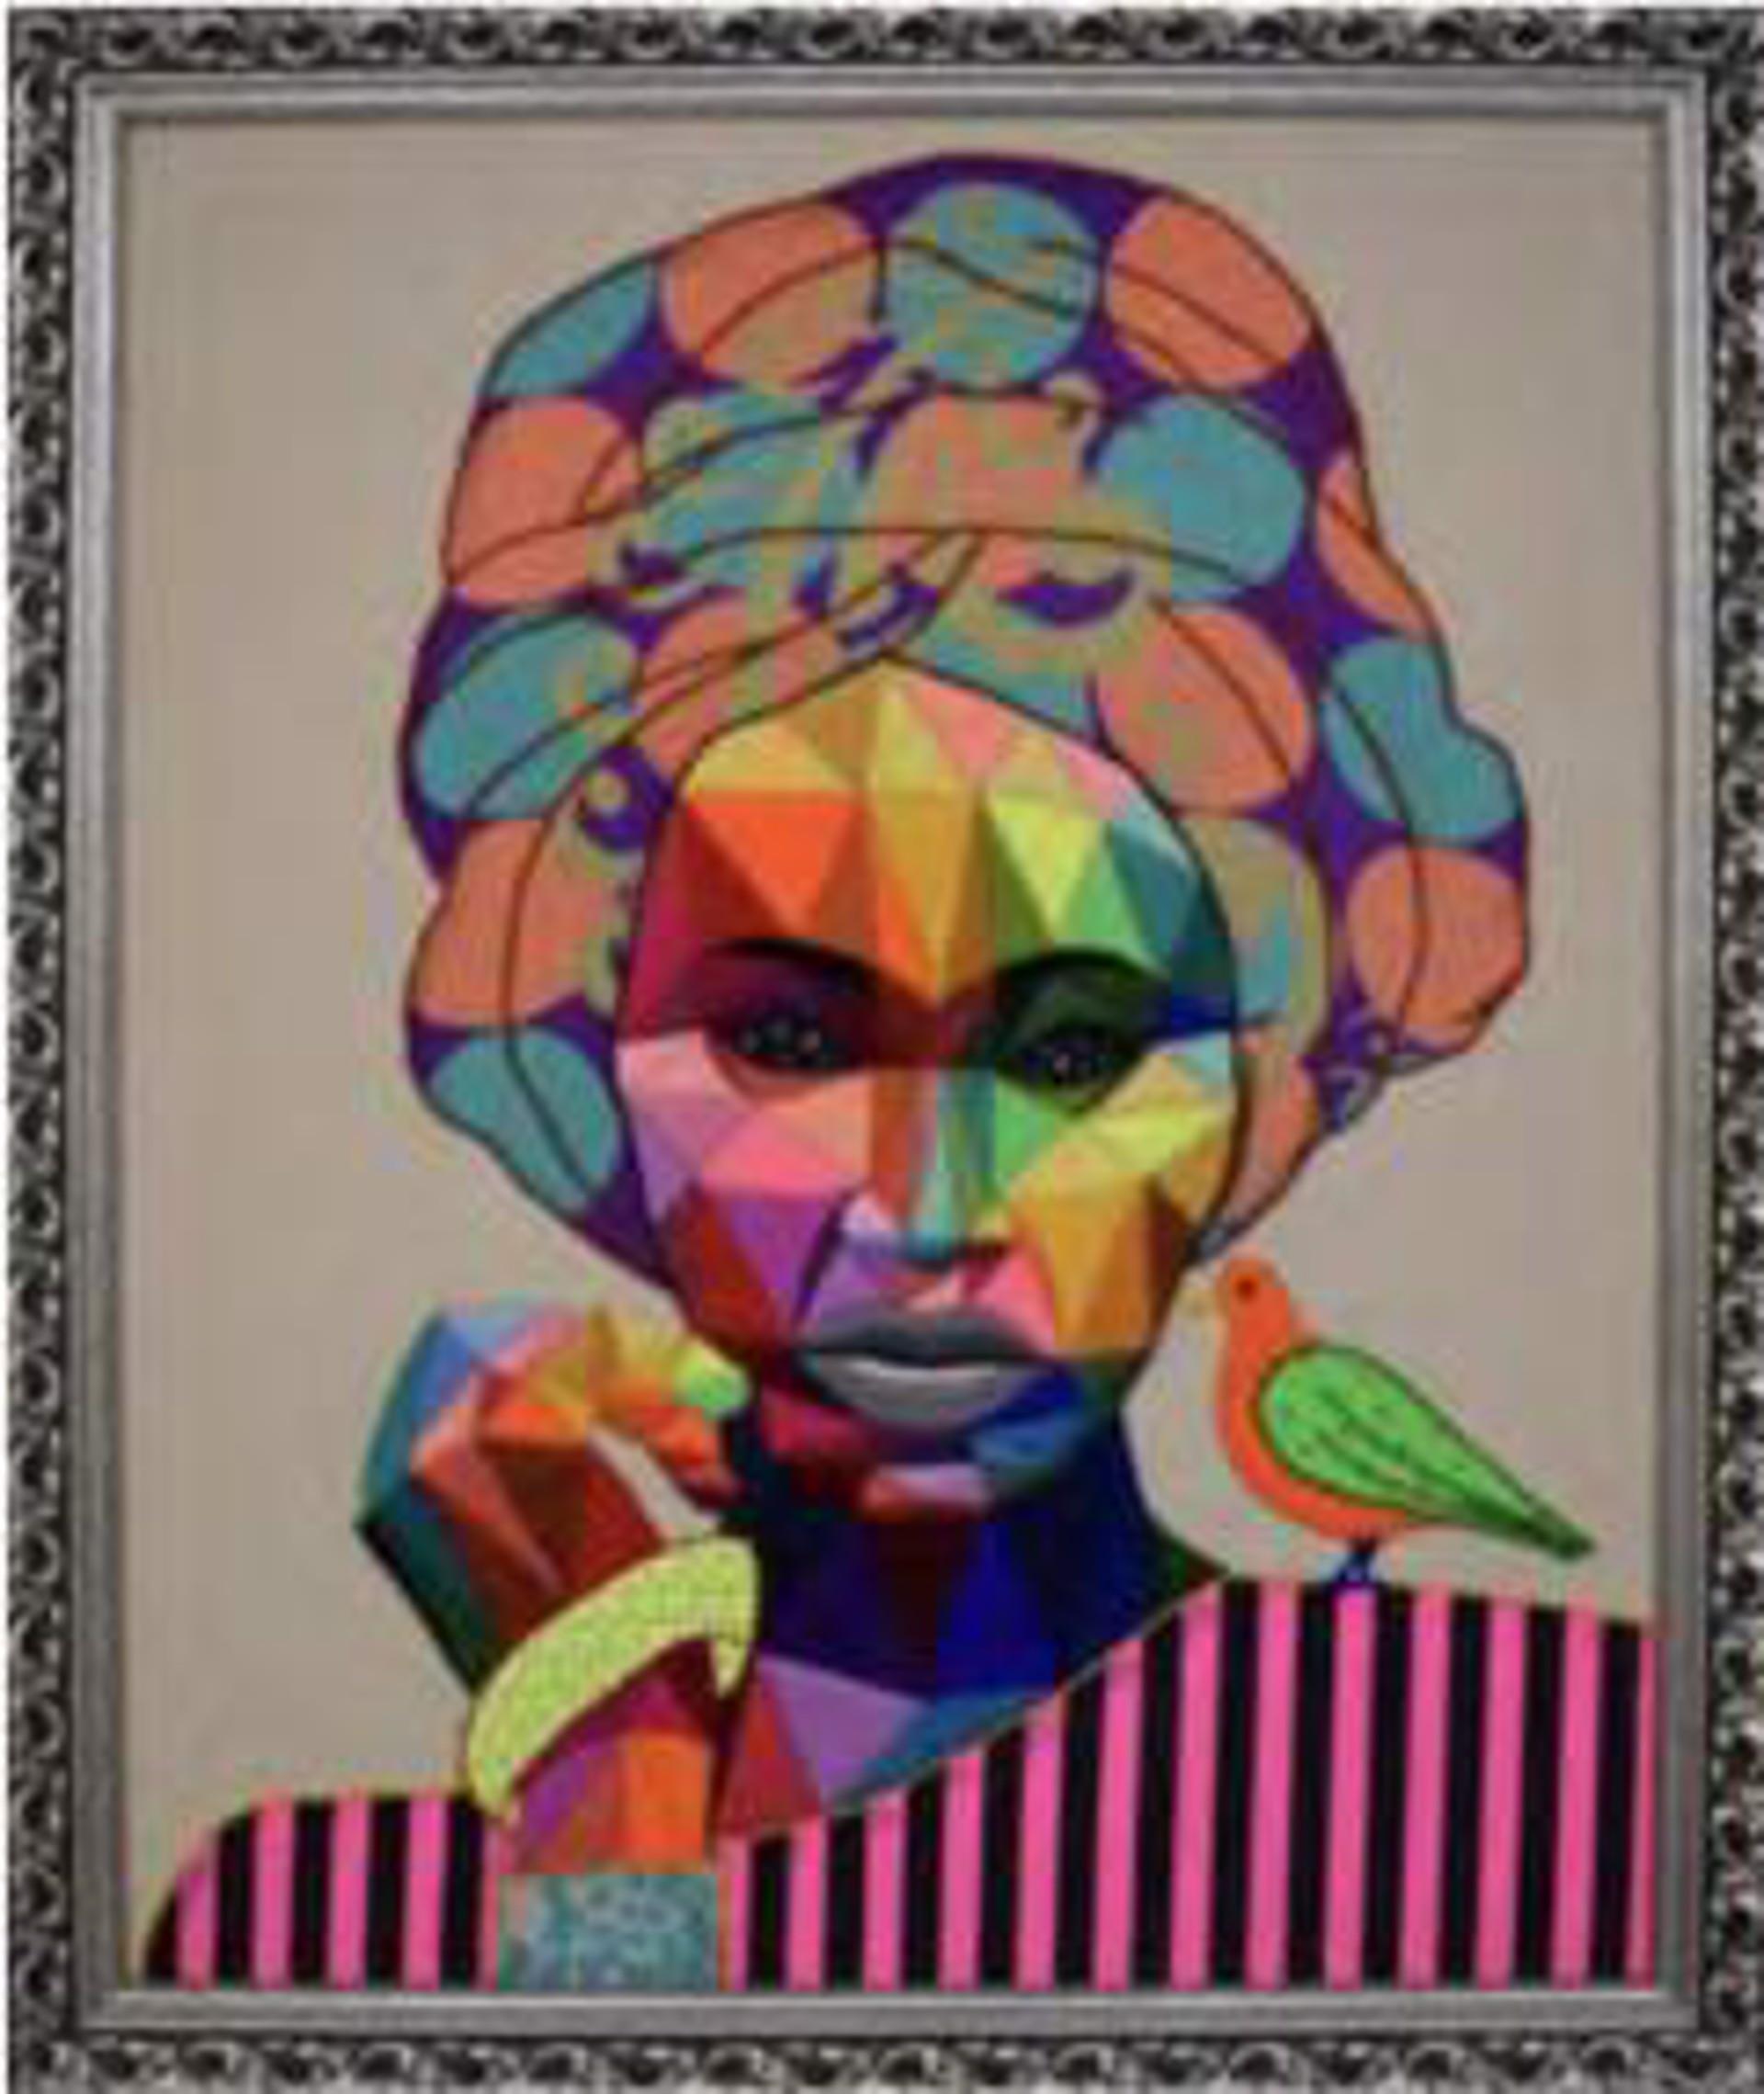 Indiafrican Mom 1 by Okuda San Miguel